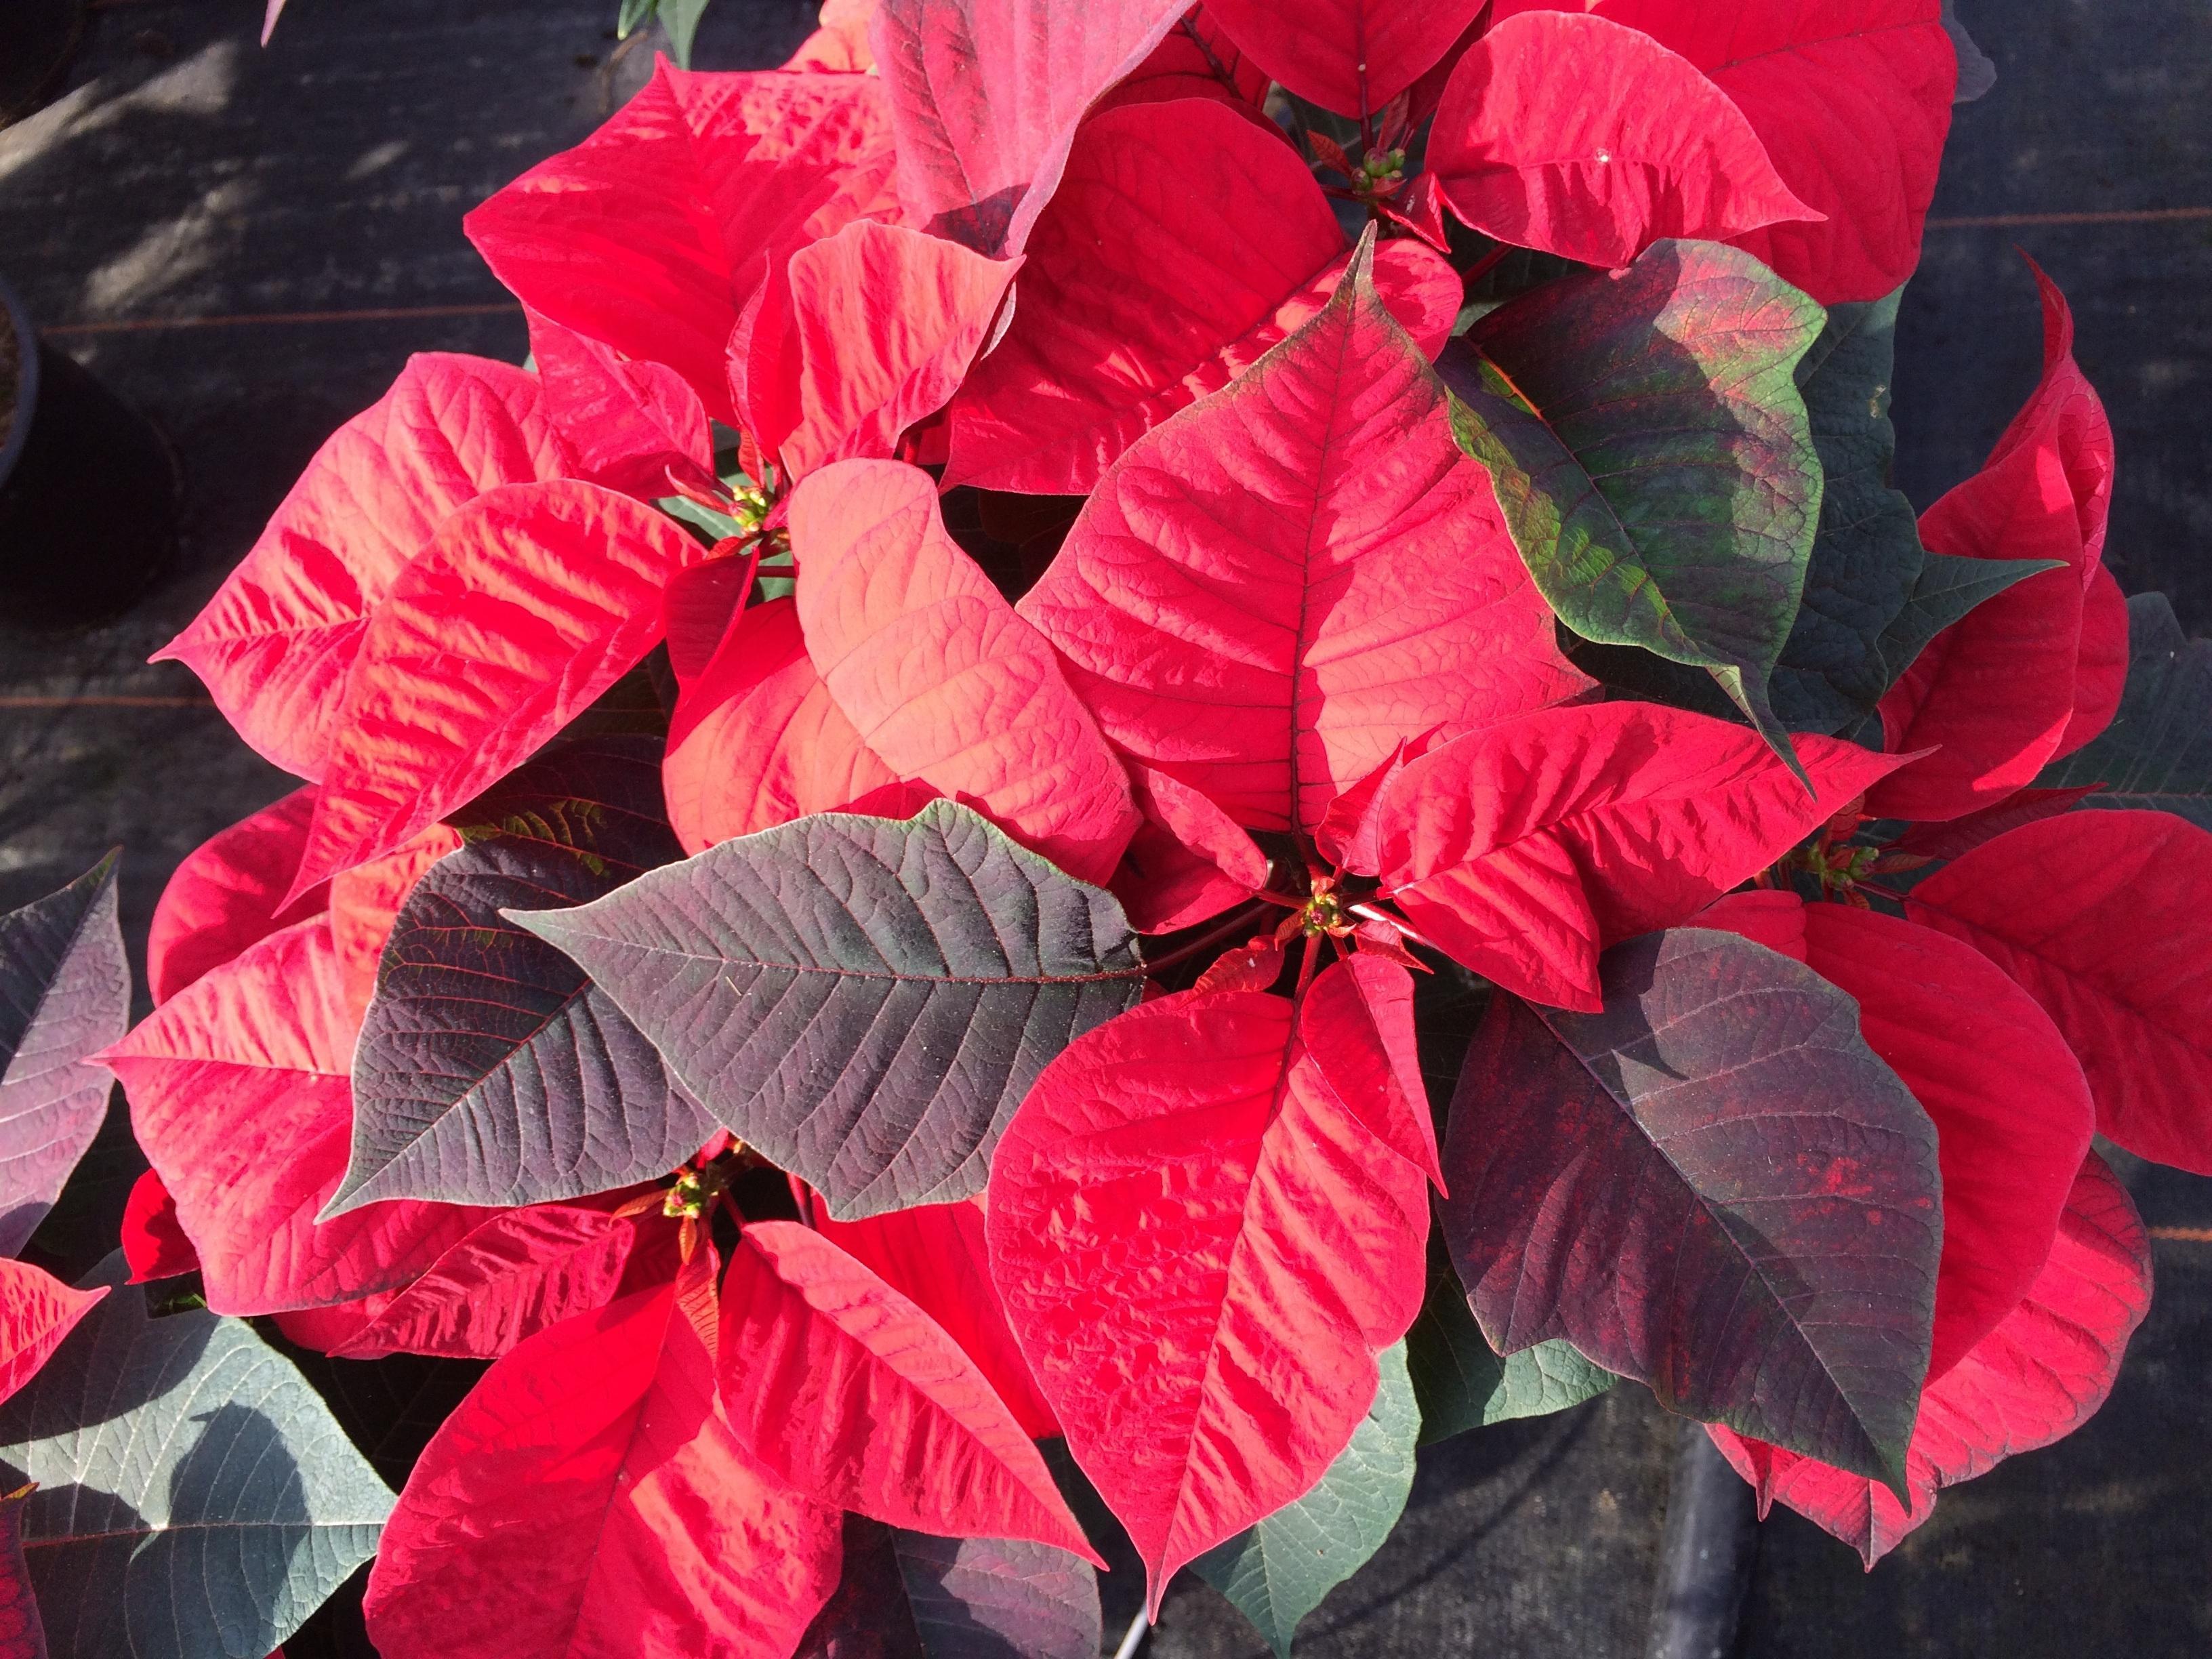 Download 3264x2448 Red Leaves, Poinsettia Wallpaper